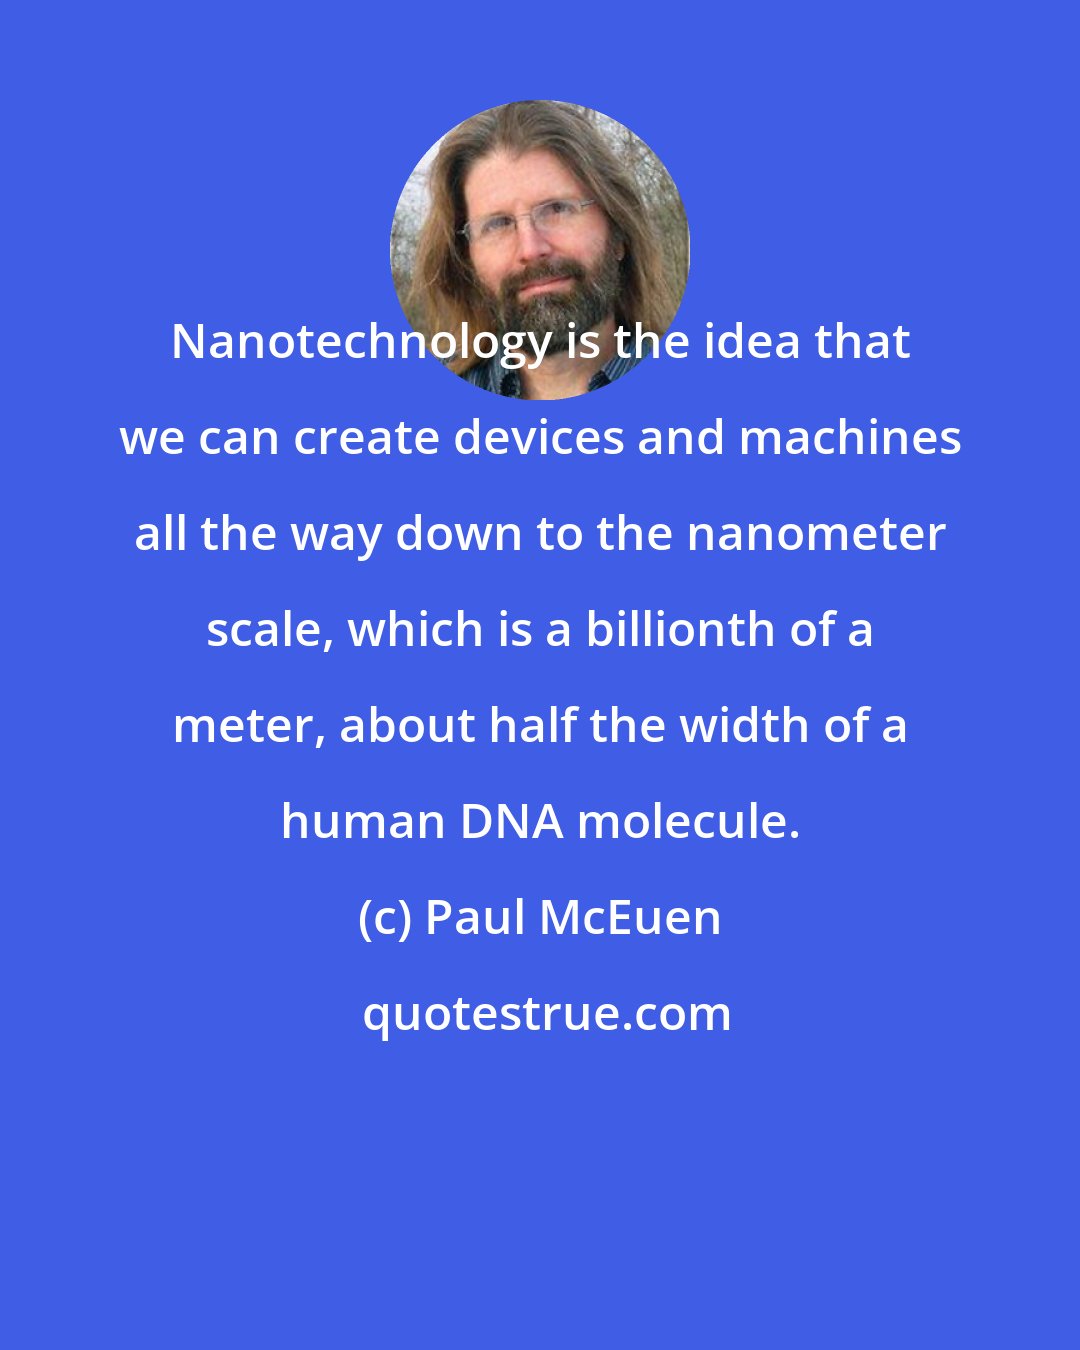 Paul McEuen: Nanotechnology is the idea that we can create devices and machines all the way down to the nanometer scale, which is a billionth of a meter, about half the width of a human DNA molecule.